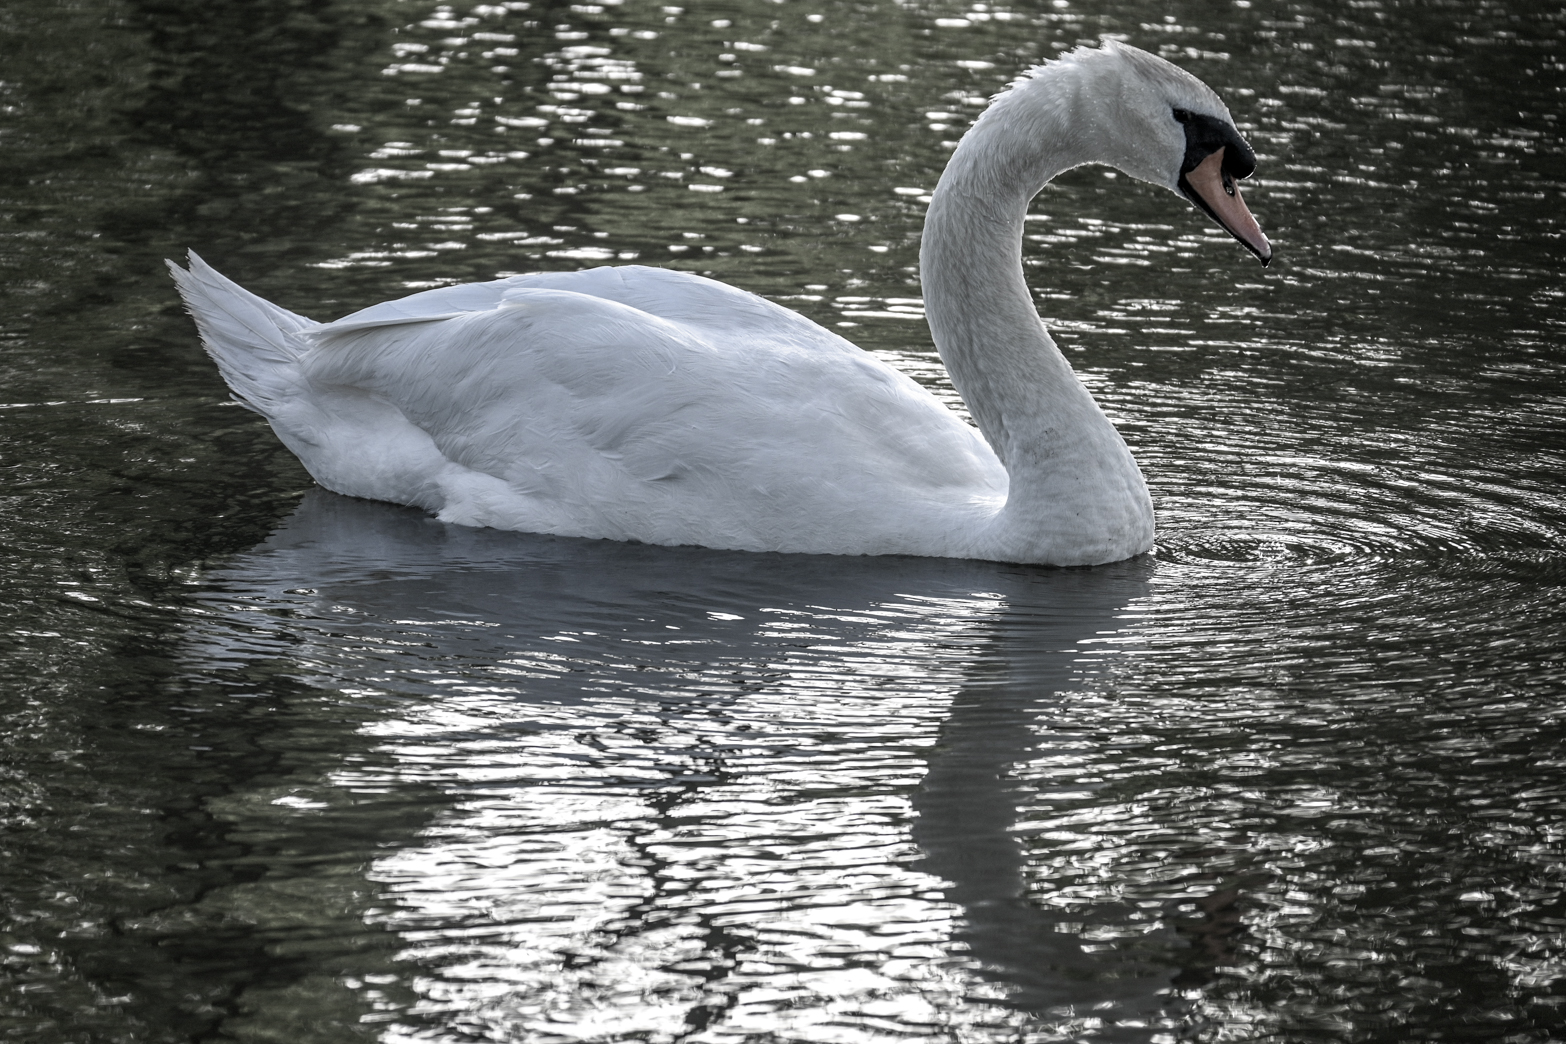 The elegance of the Swan...